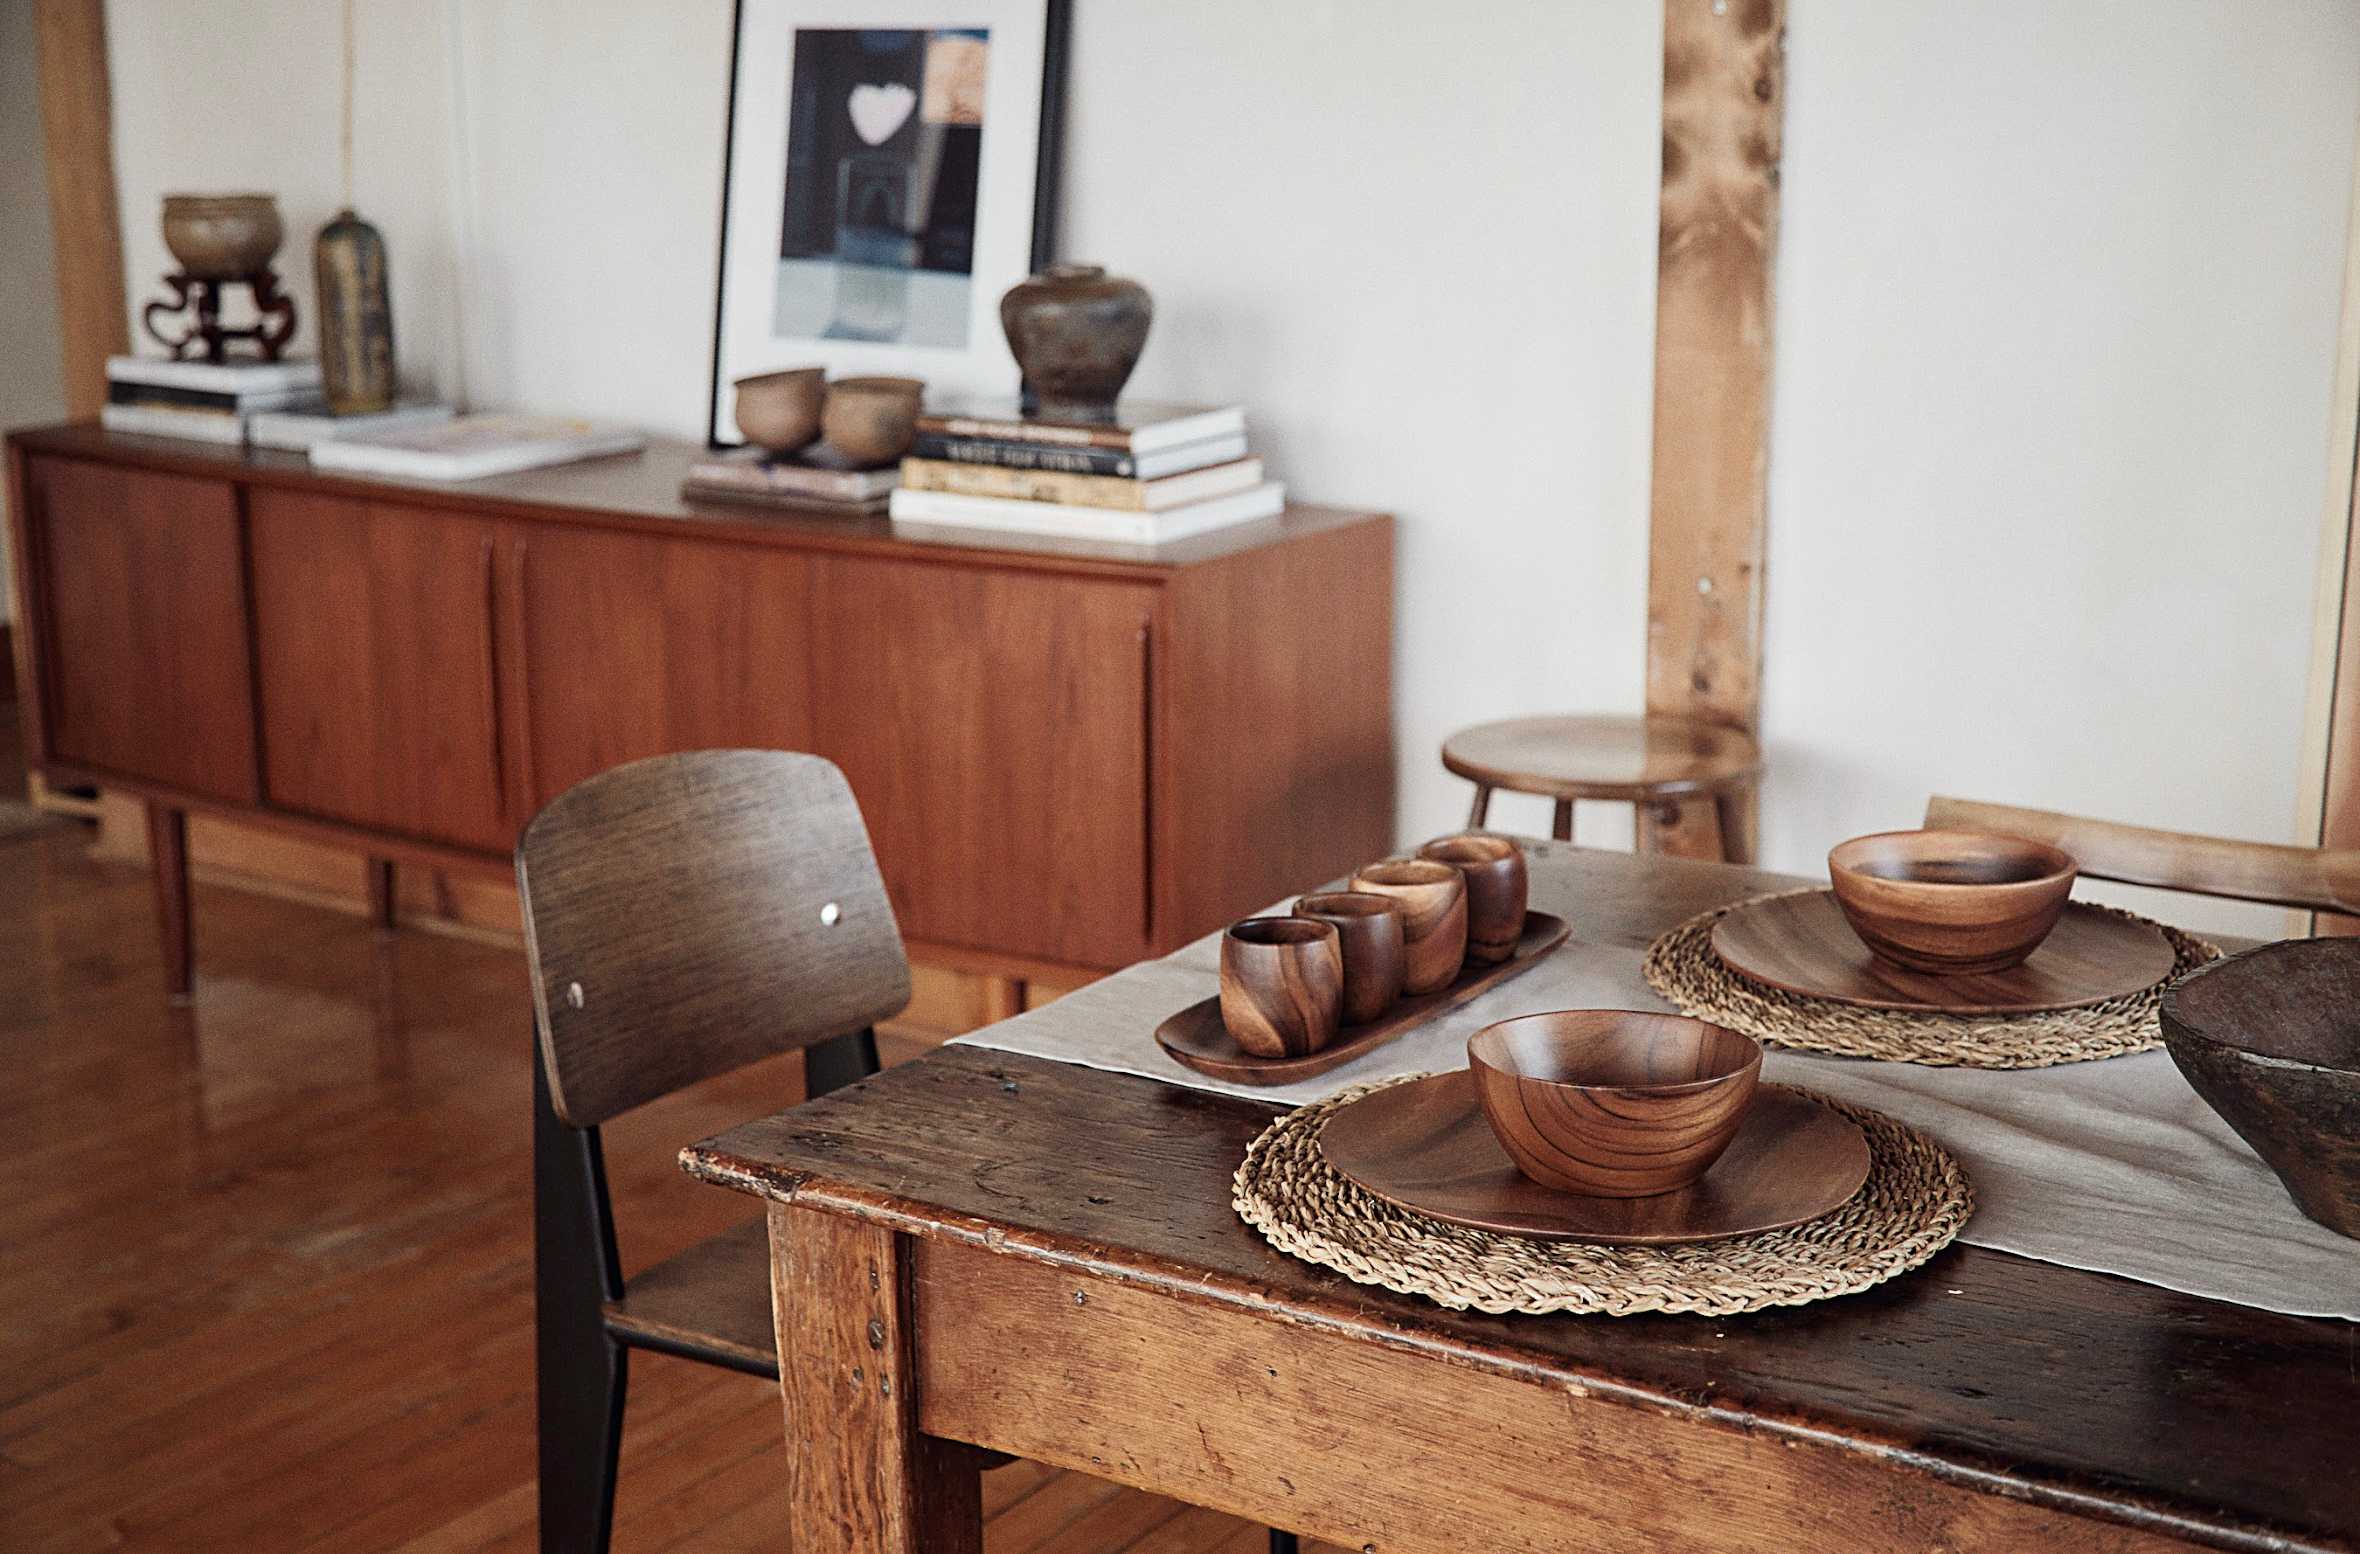 The dining table (with wooden bowls and trays from Baguio) was originally a harvest table used by the Mennonites in the 1800s; the side cabinet was purchased online.